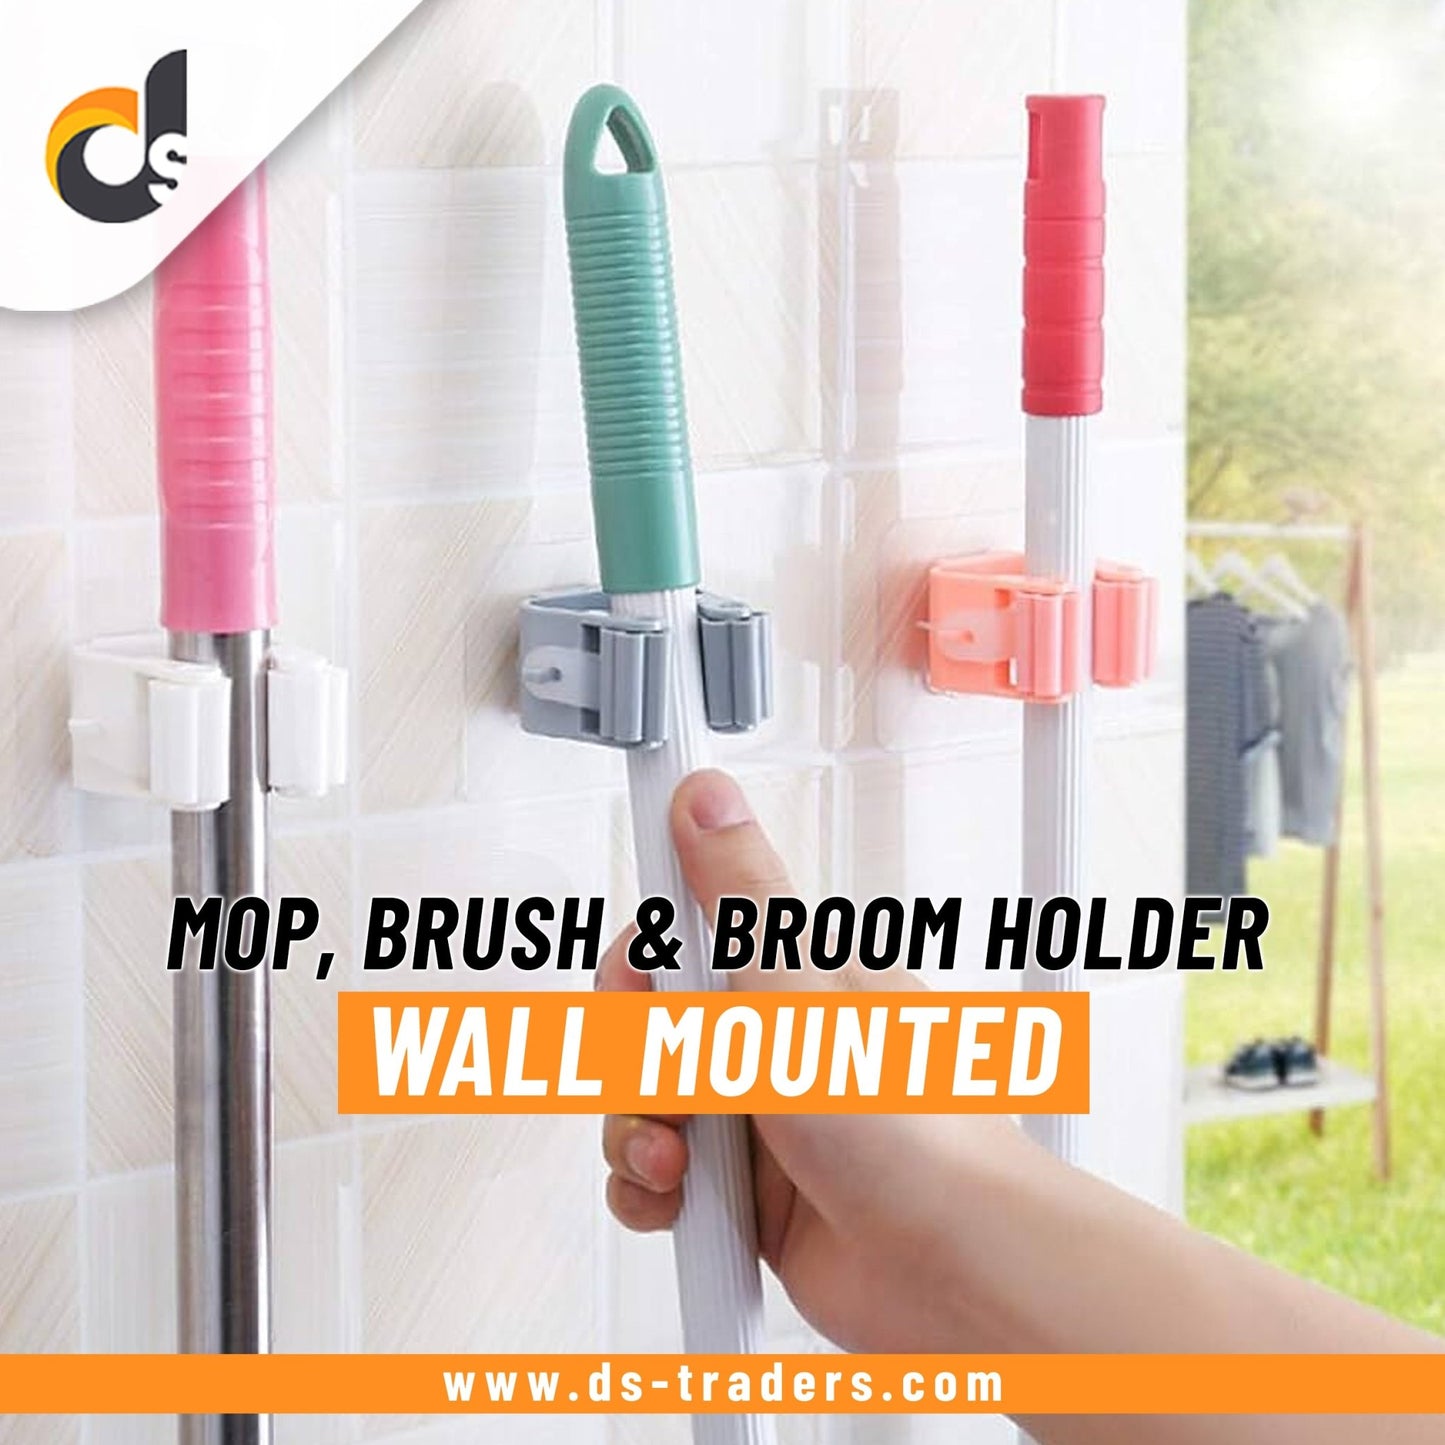 Pack Of 3 - Wall Mounted Mop, Brush & Broom Holder - DS Traders